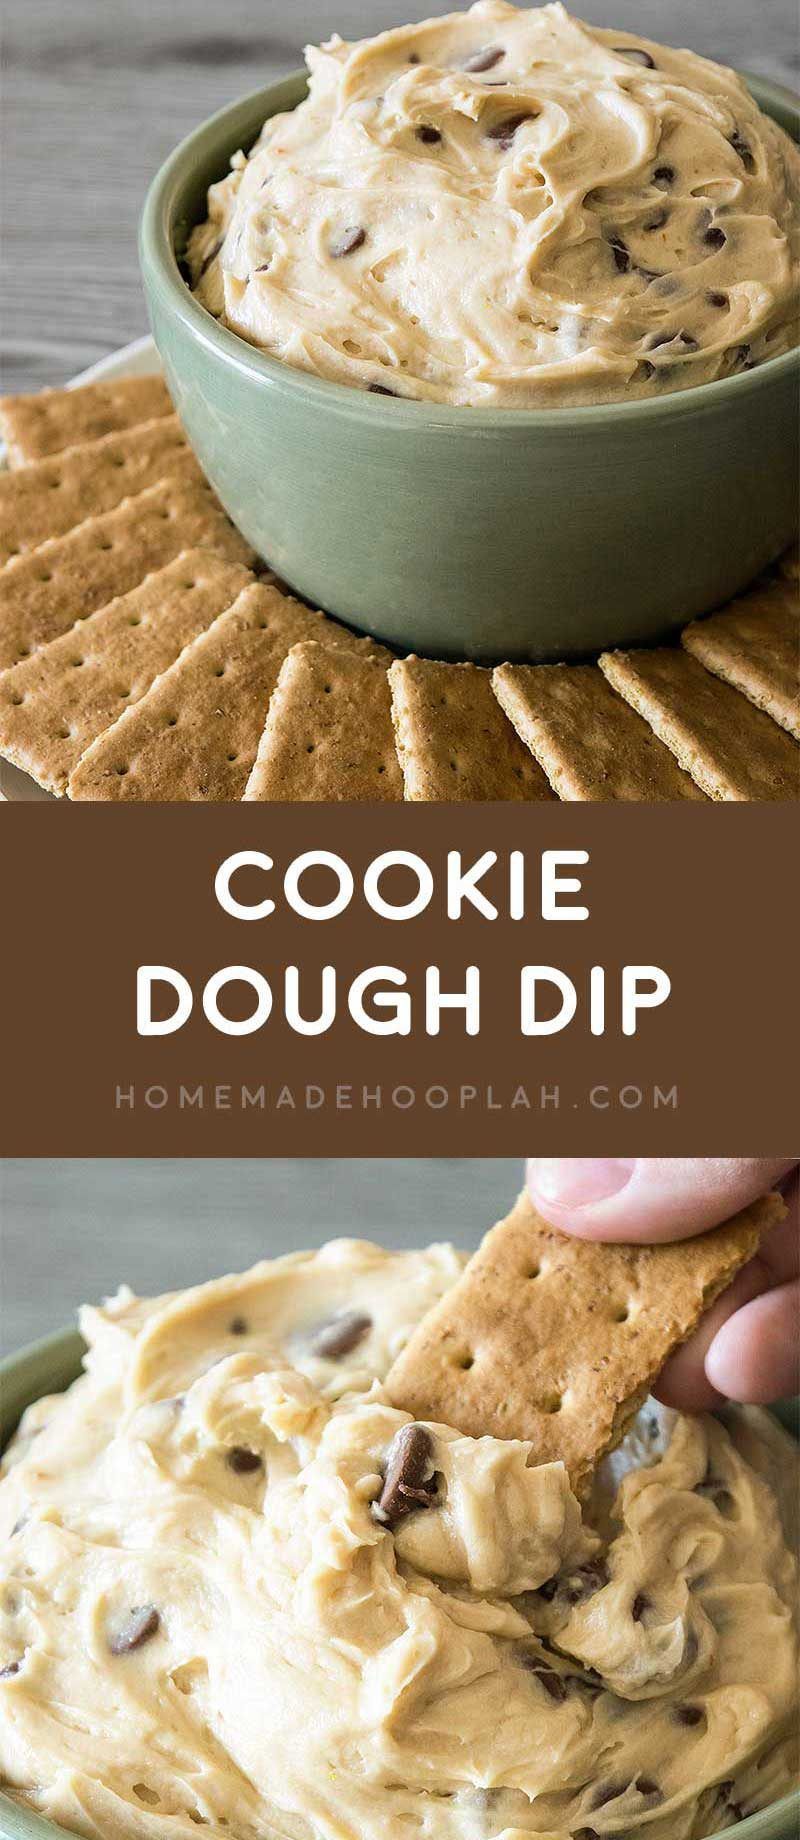 Cookie Dough Dip! Dazzle your guests by serving up dessert first with this ultra-creamy cookie dough dip with chocolate chips.